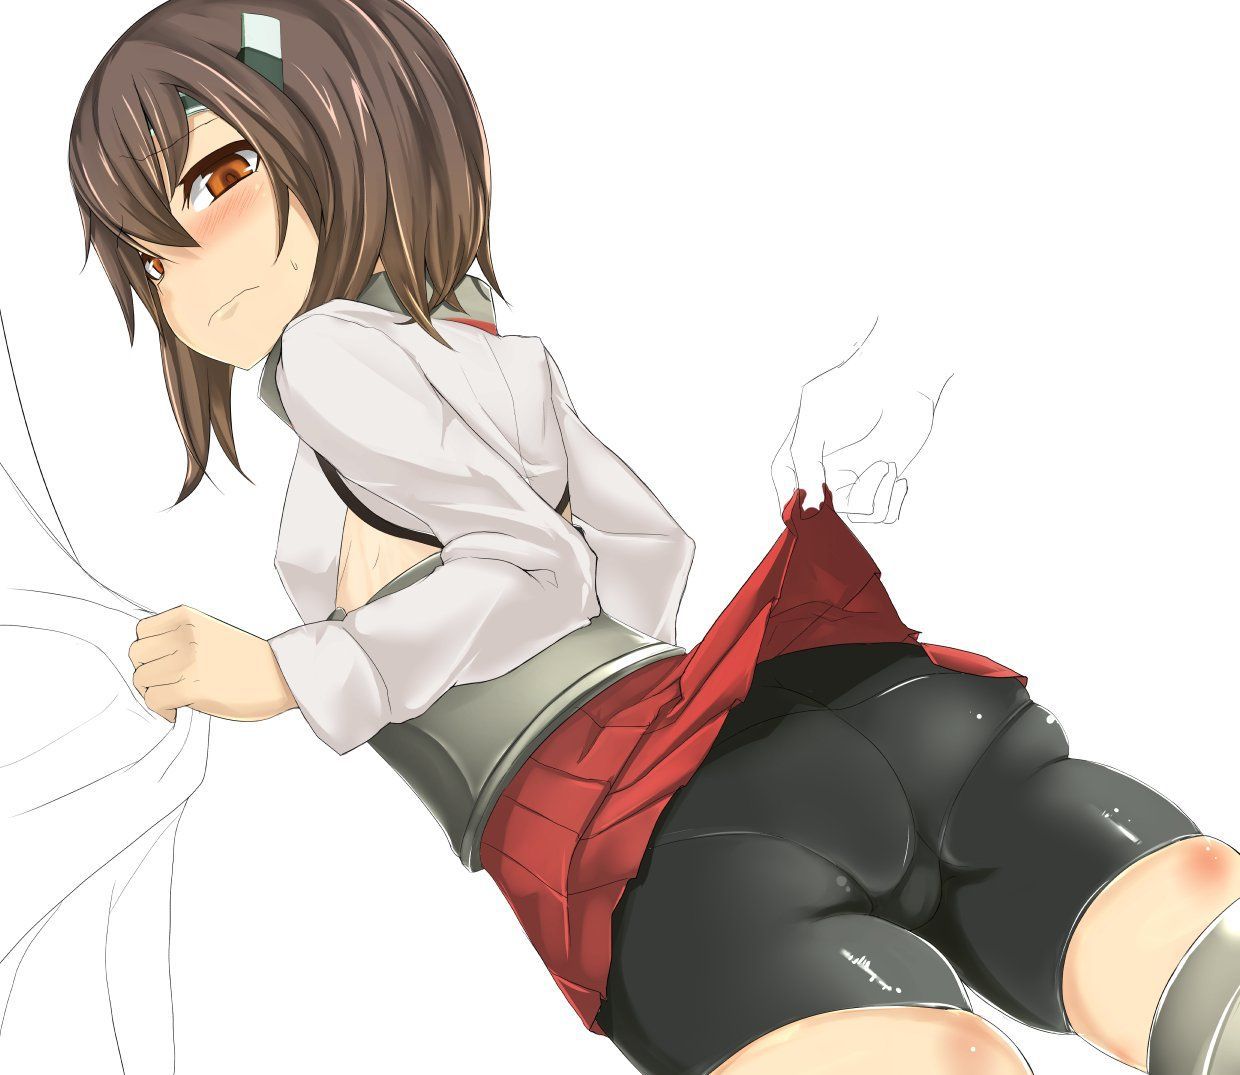 [2nd] Second erotic image of a girl spats in close contact with the Chile the lower body of the pants 4 [spats] 12